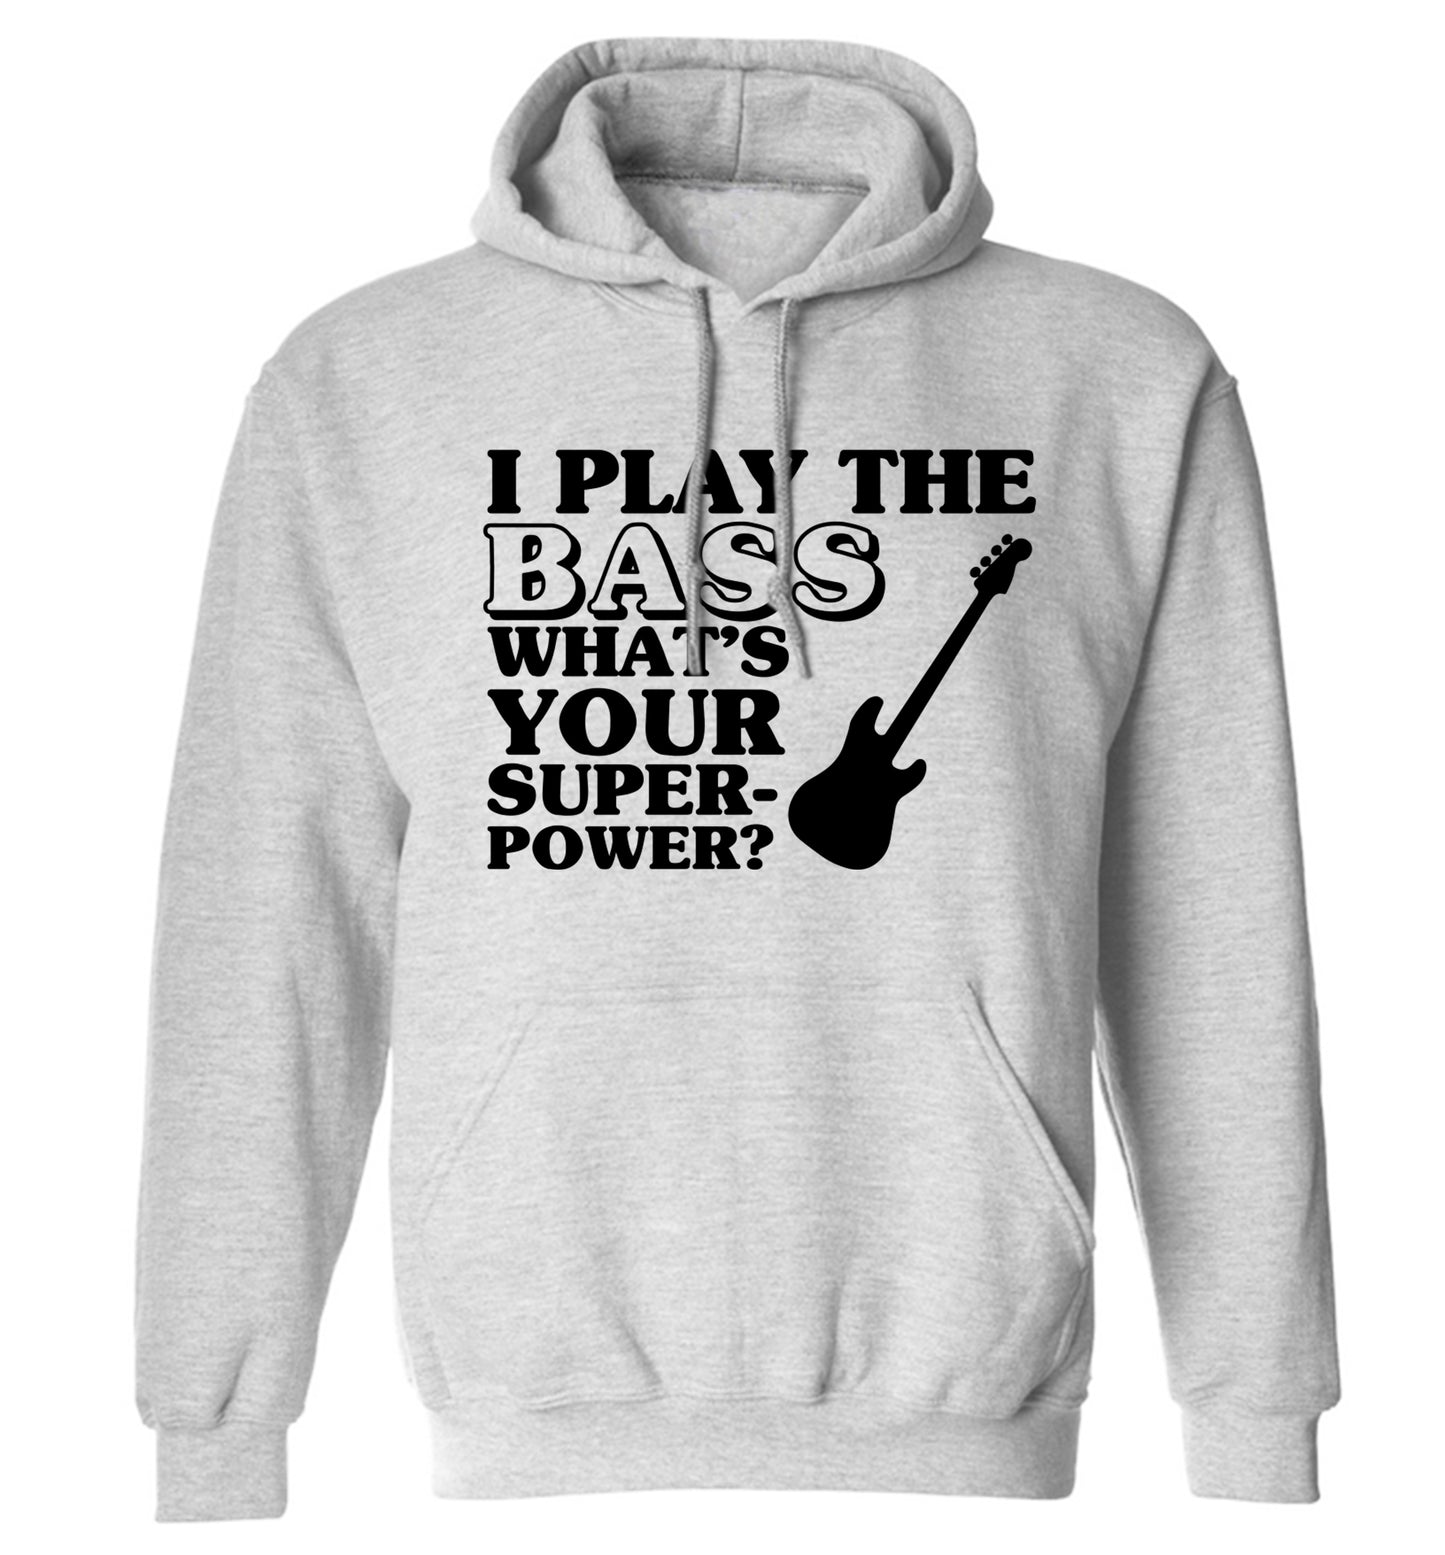 I play the bass what's your superpower? adults unisex grey hoodie 2XL